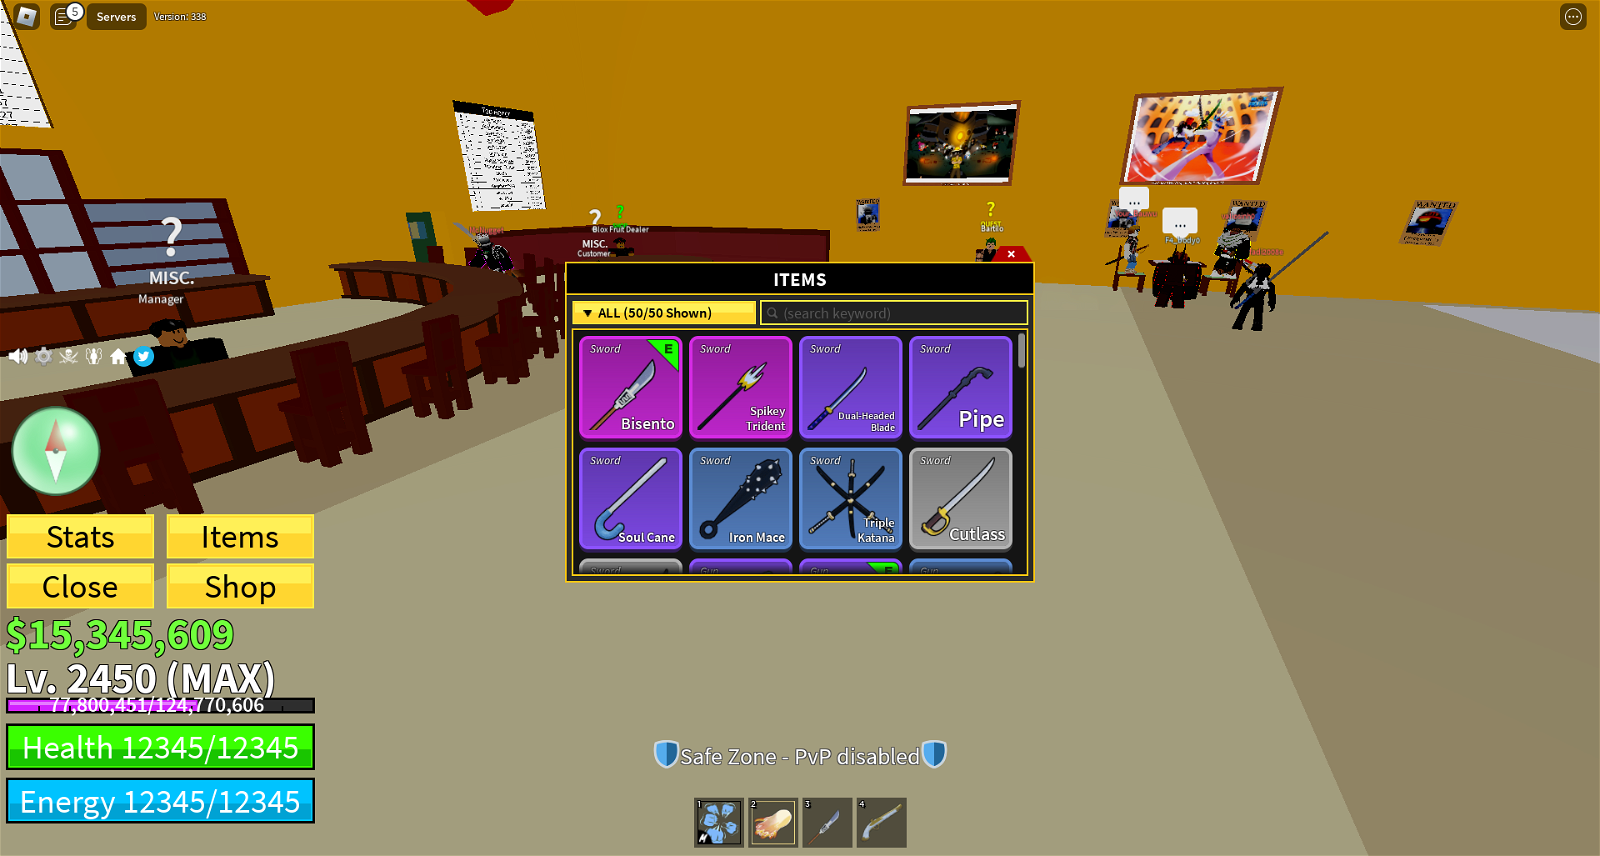 SOLD - Unverefied Blox Fruit : Max Level 2450